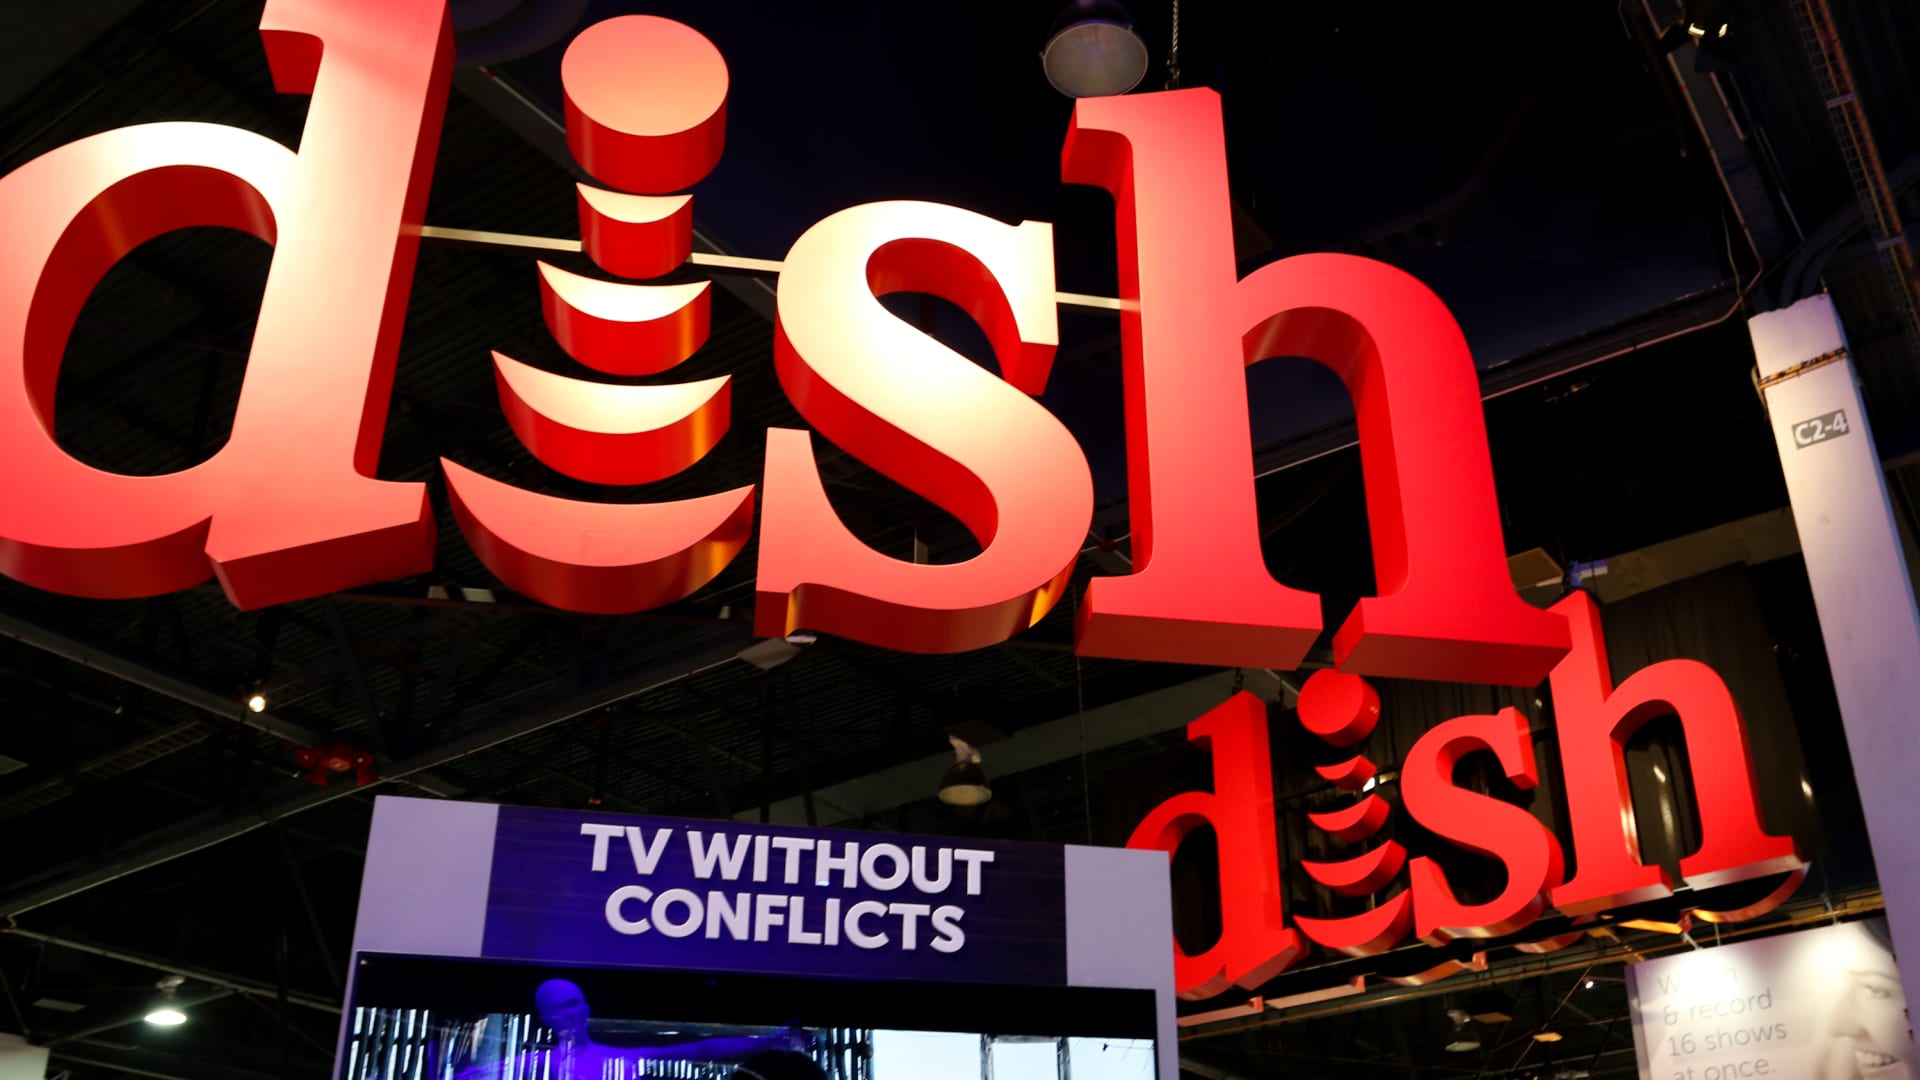 Dish Network maintains that the network outage was a breach of cybersecurity